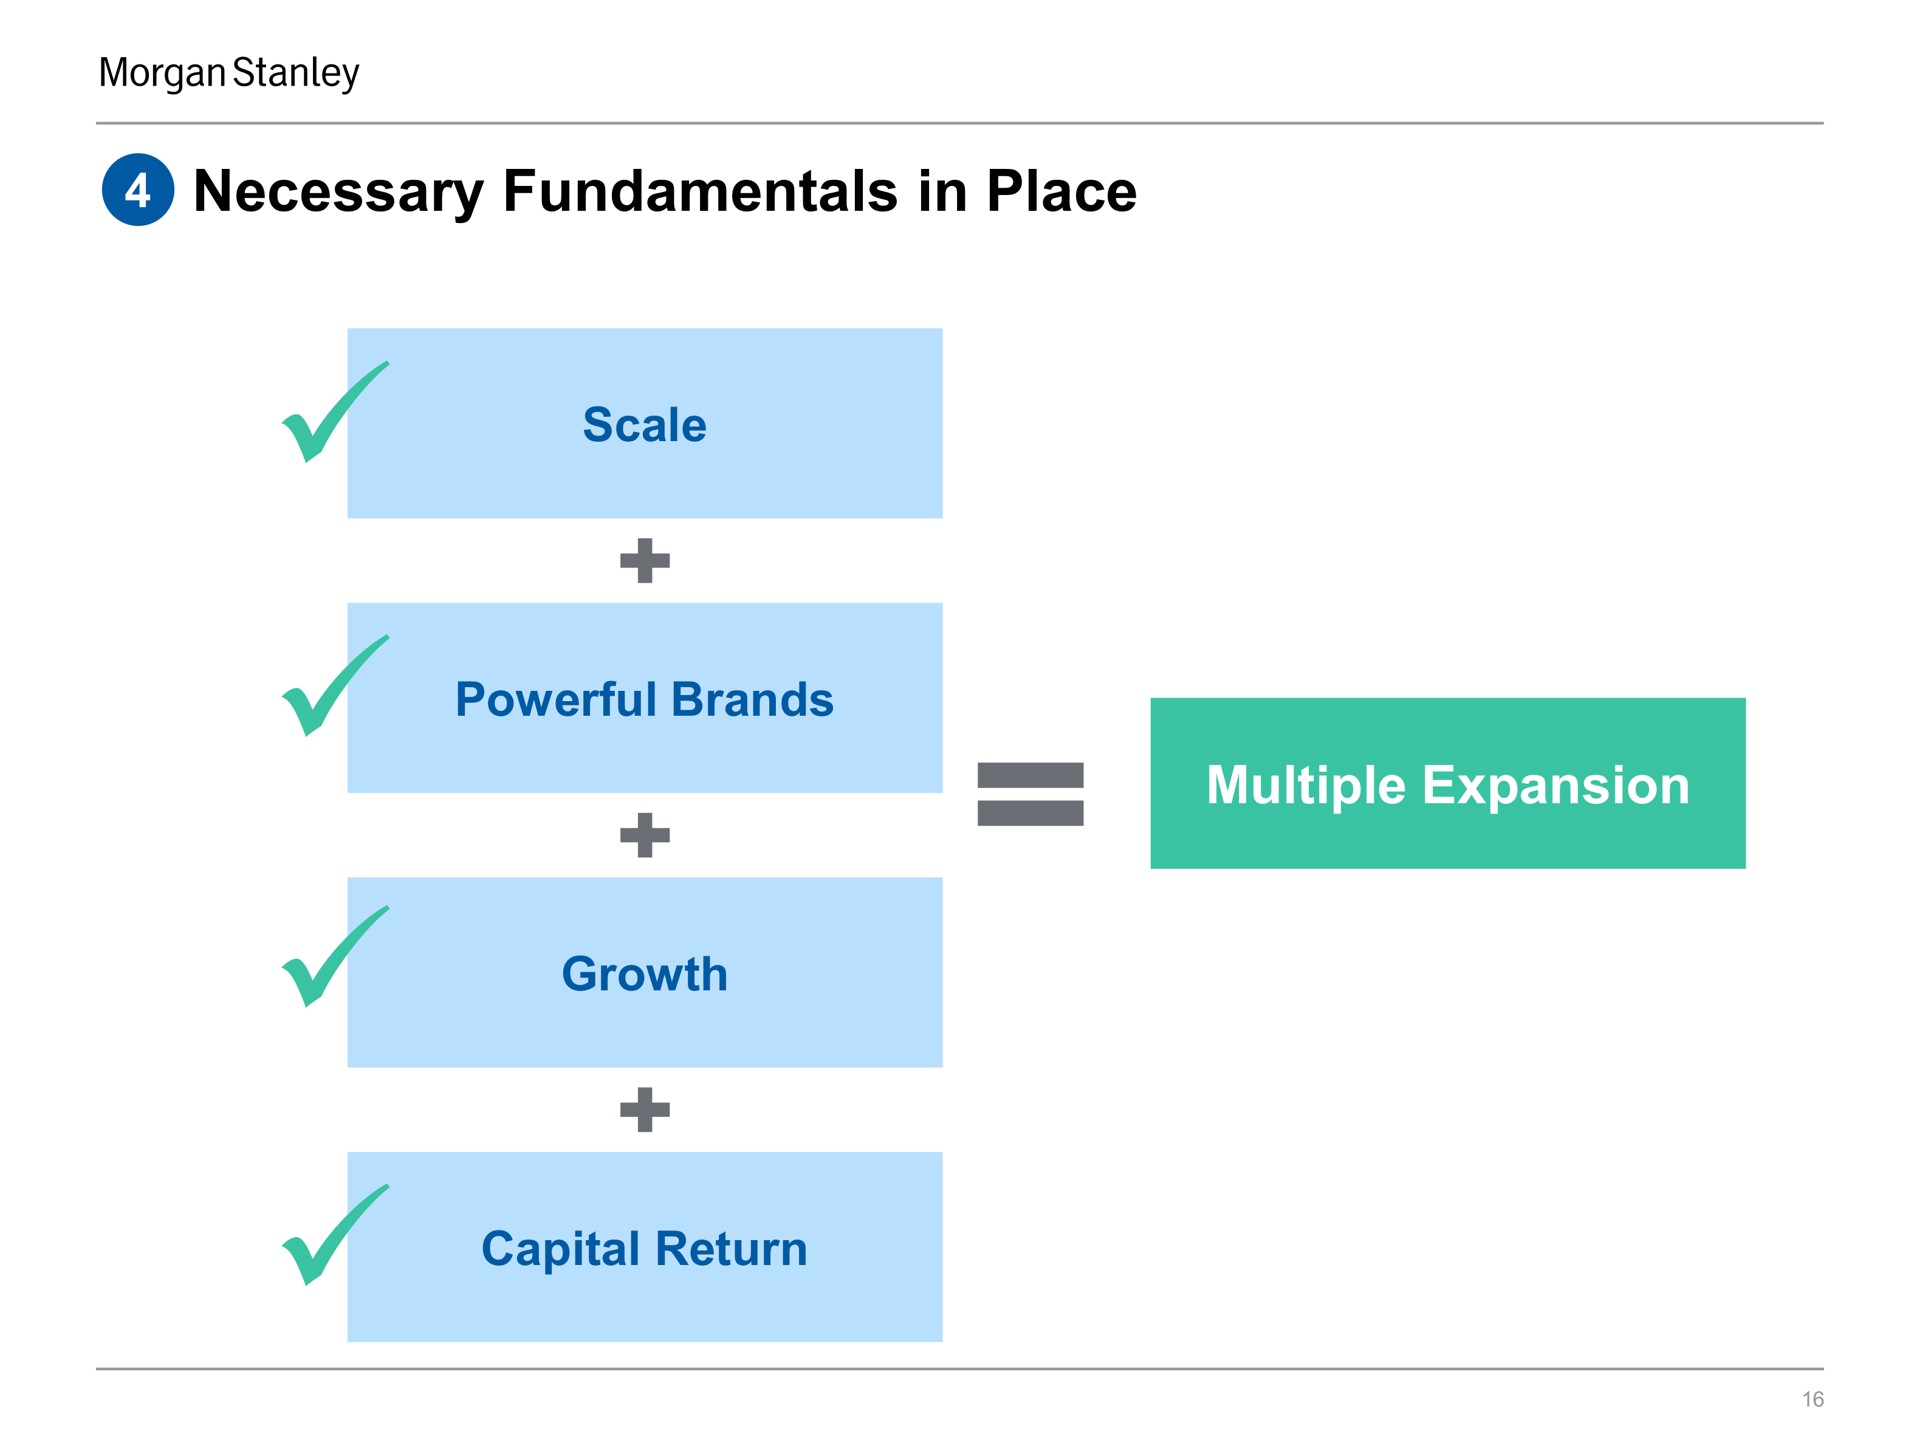 necessary fundamentals in place scale powerful brands growth capital return multiple expansion i | Morgan Stanley